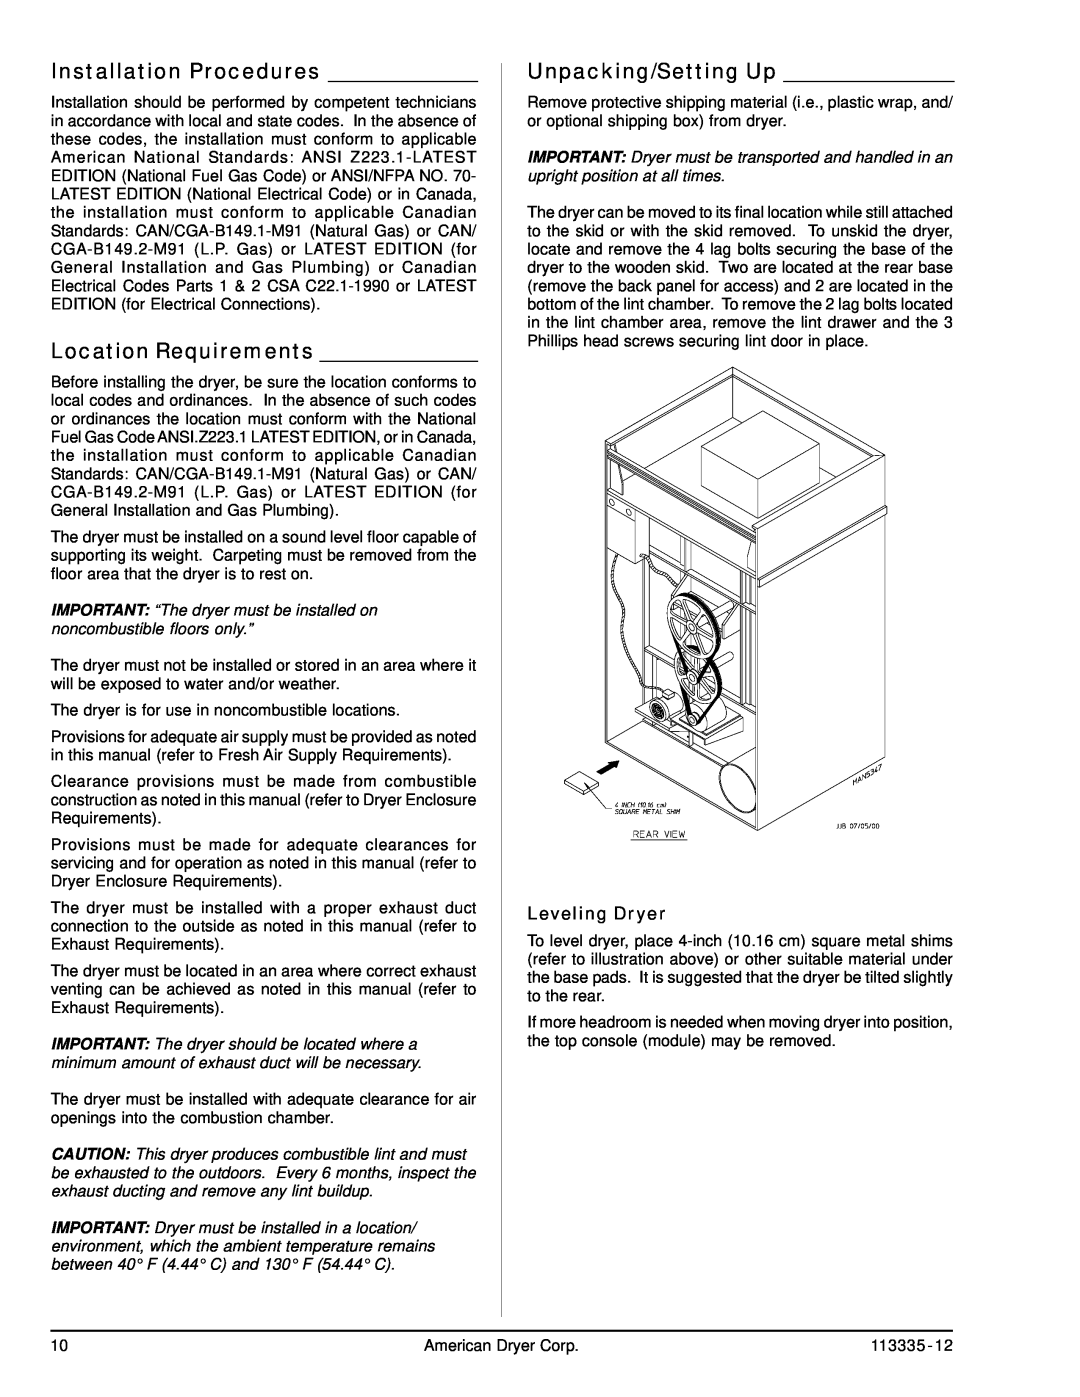 American Dryer Corp ML-130 III Installation Procedures, Location Requirements, Unpacking/Setting Up, Leveling Dryer 